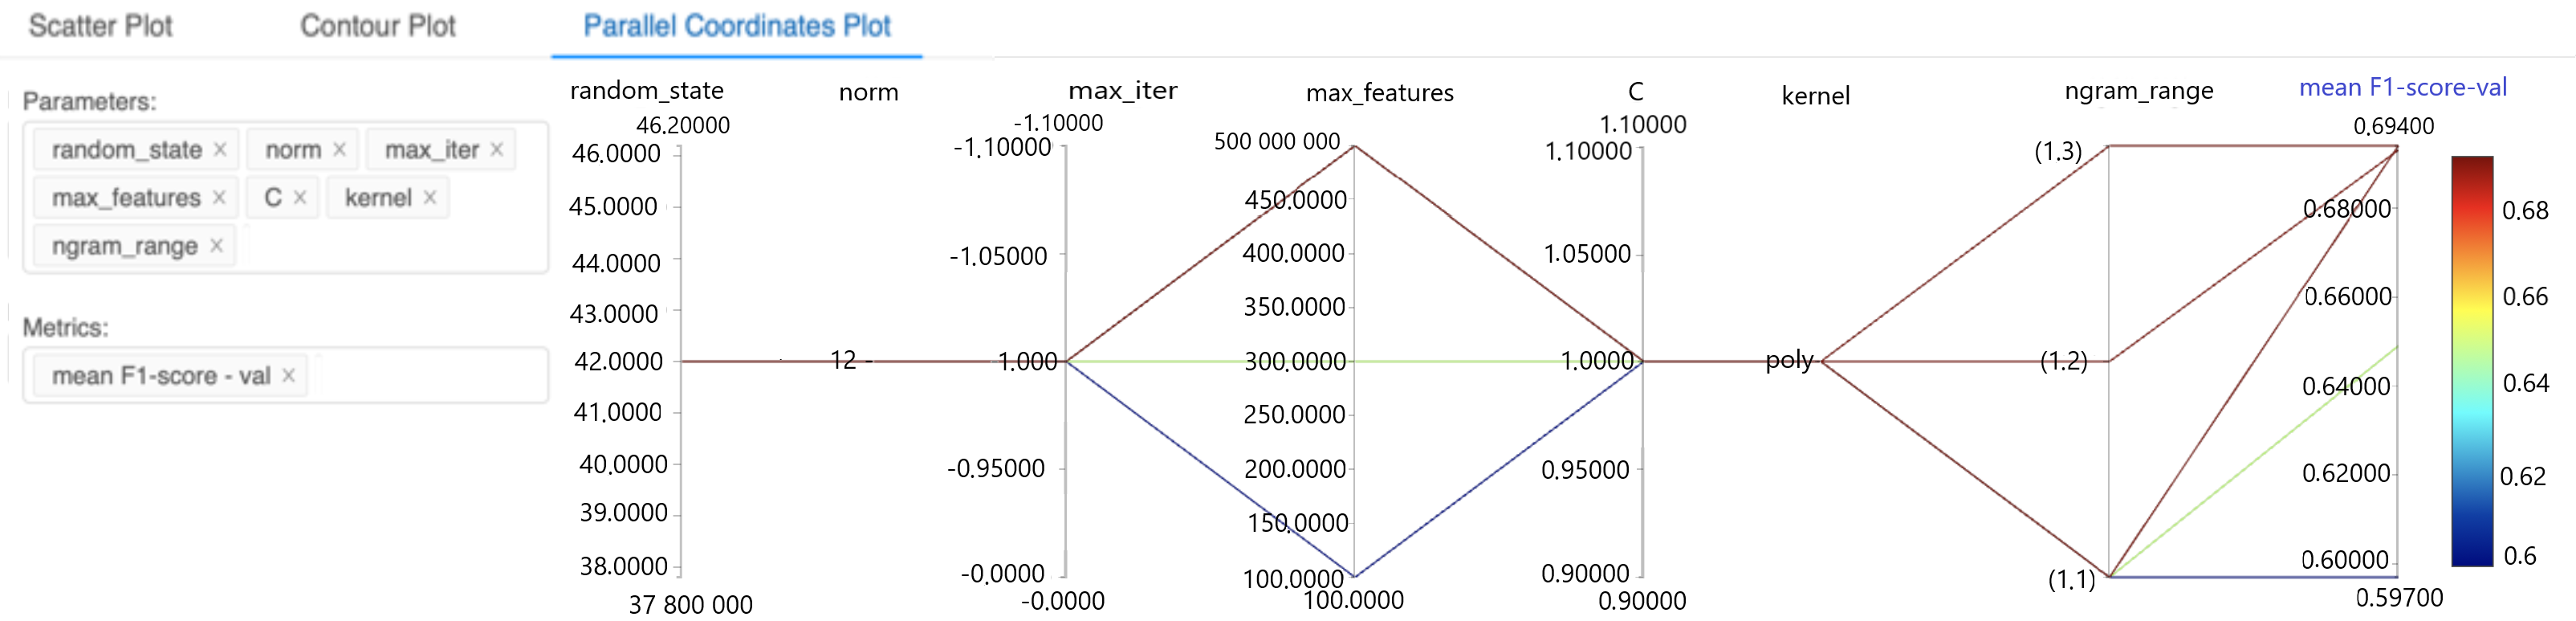 Figure 7: Configuring the parallel coordinates plot to visualize the effects of different parameters on the metrics of interest